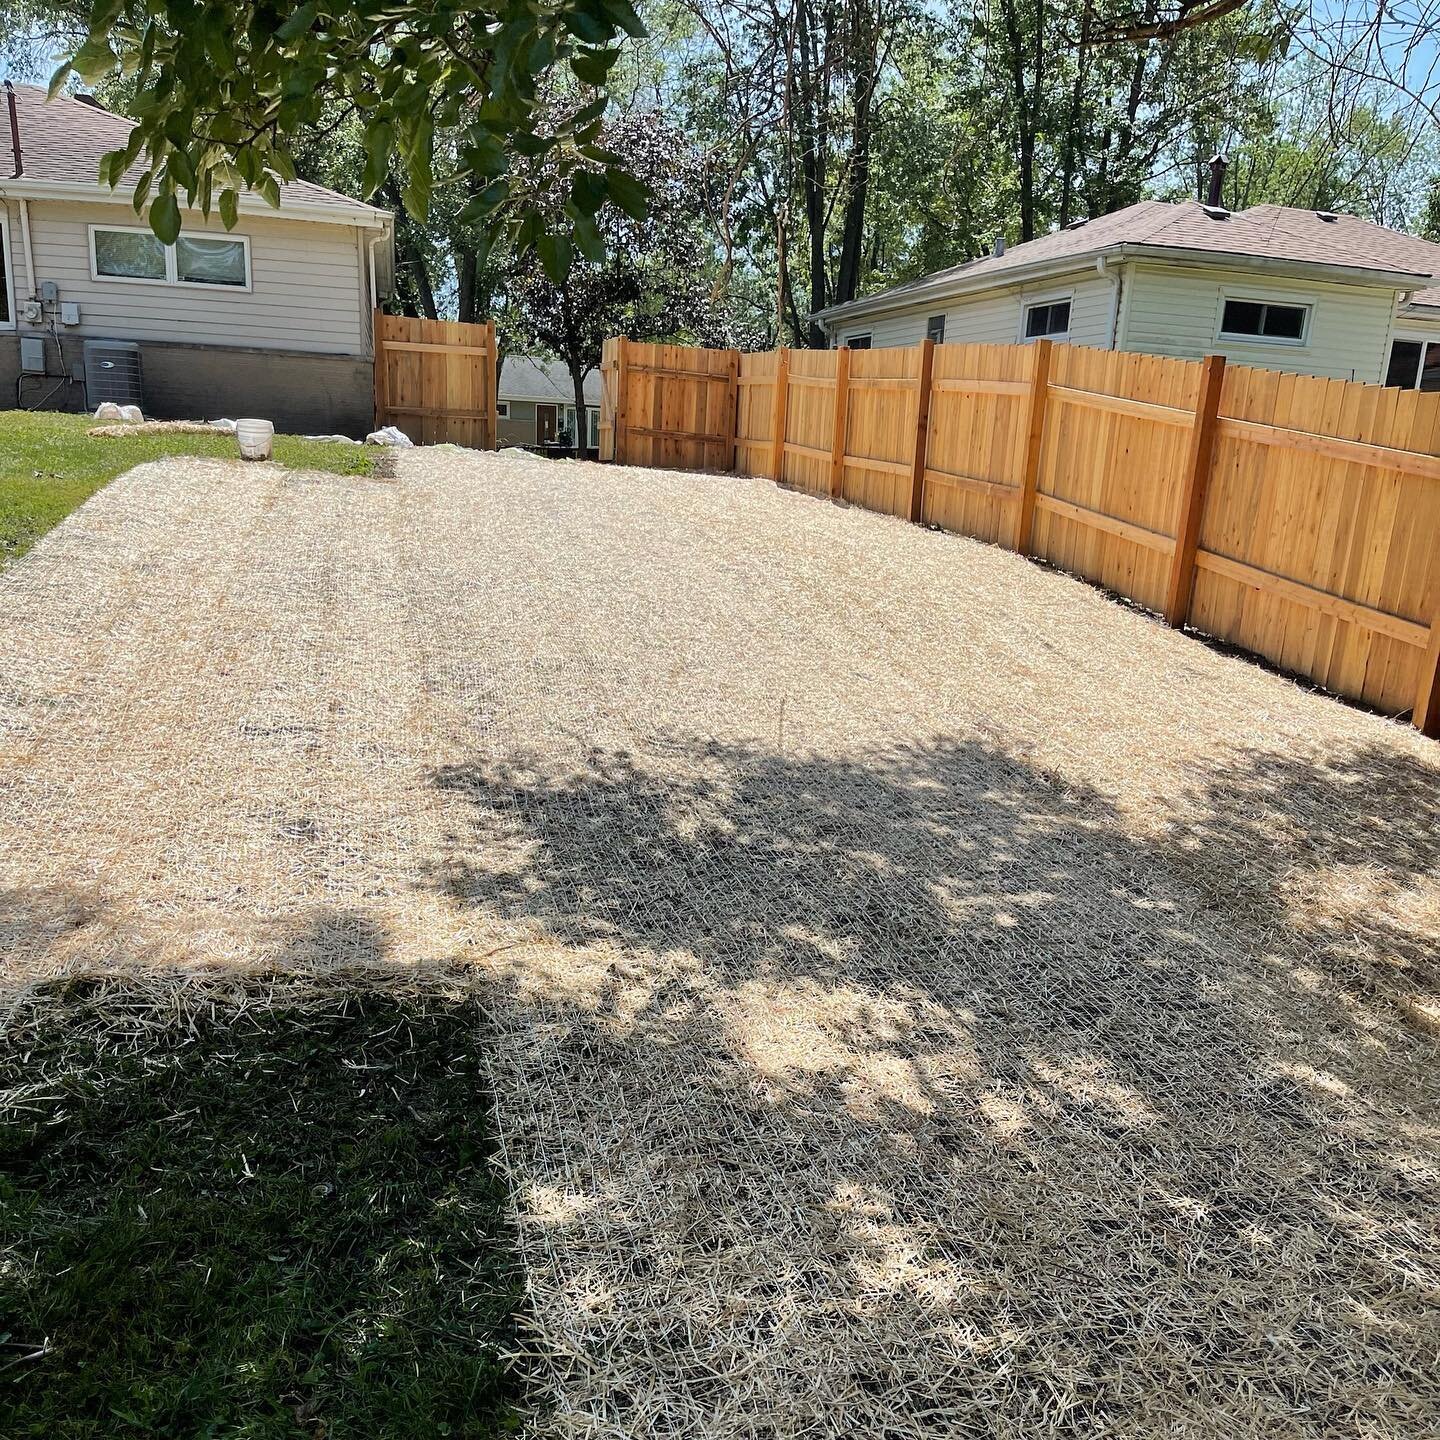 This was a fantastic project to work on. We installed a new #fence, removed thick brush, trees, weeds, and also leveled out their yard with new seed and aeration.

Yes, we also do #landscaping! This was a HUGE transformation. Before and after picture